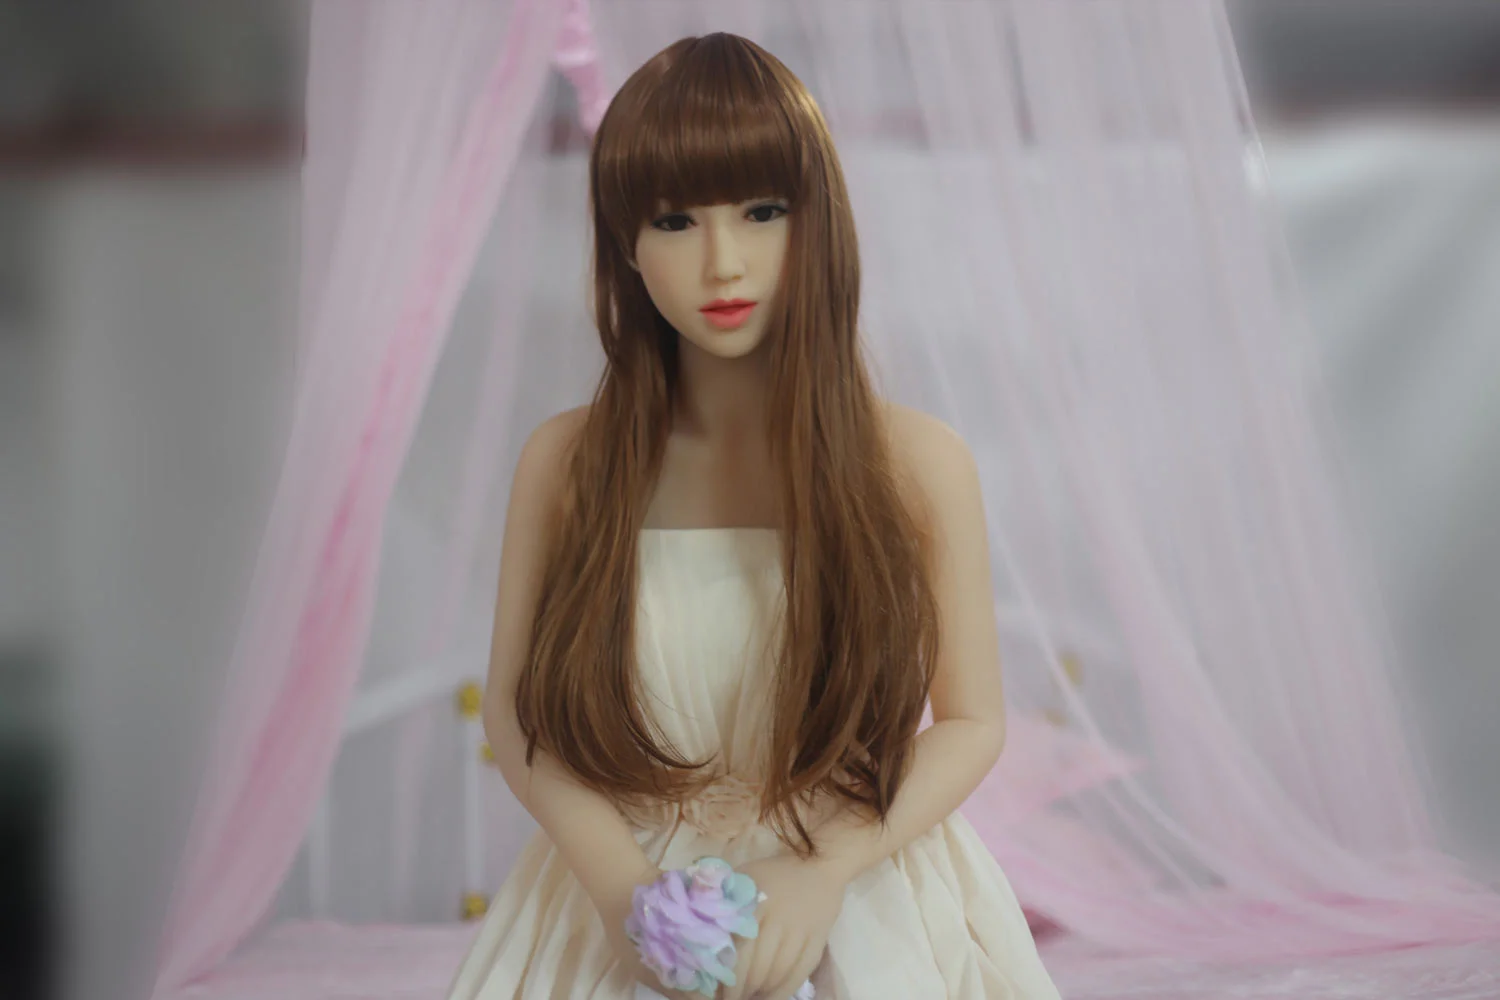 Sex doll with flowers in both hands